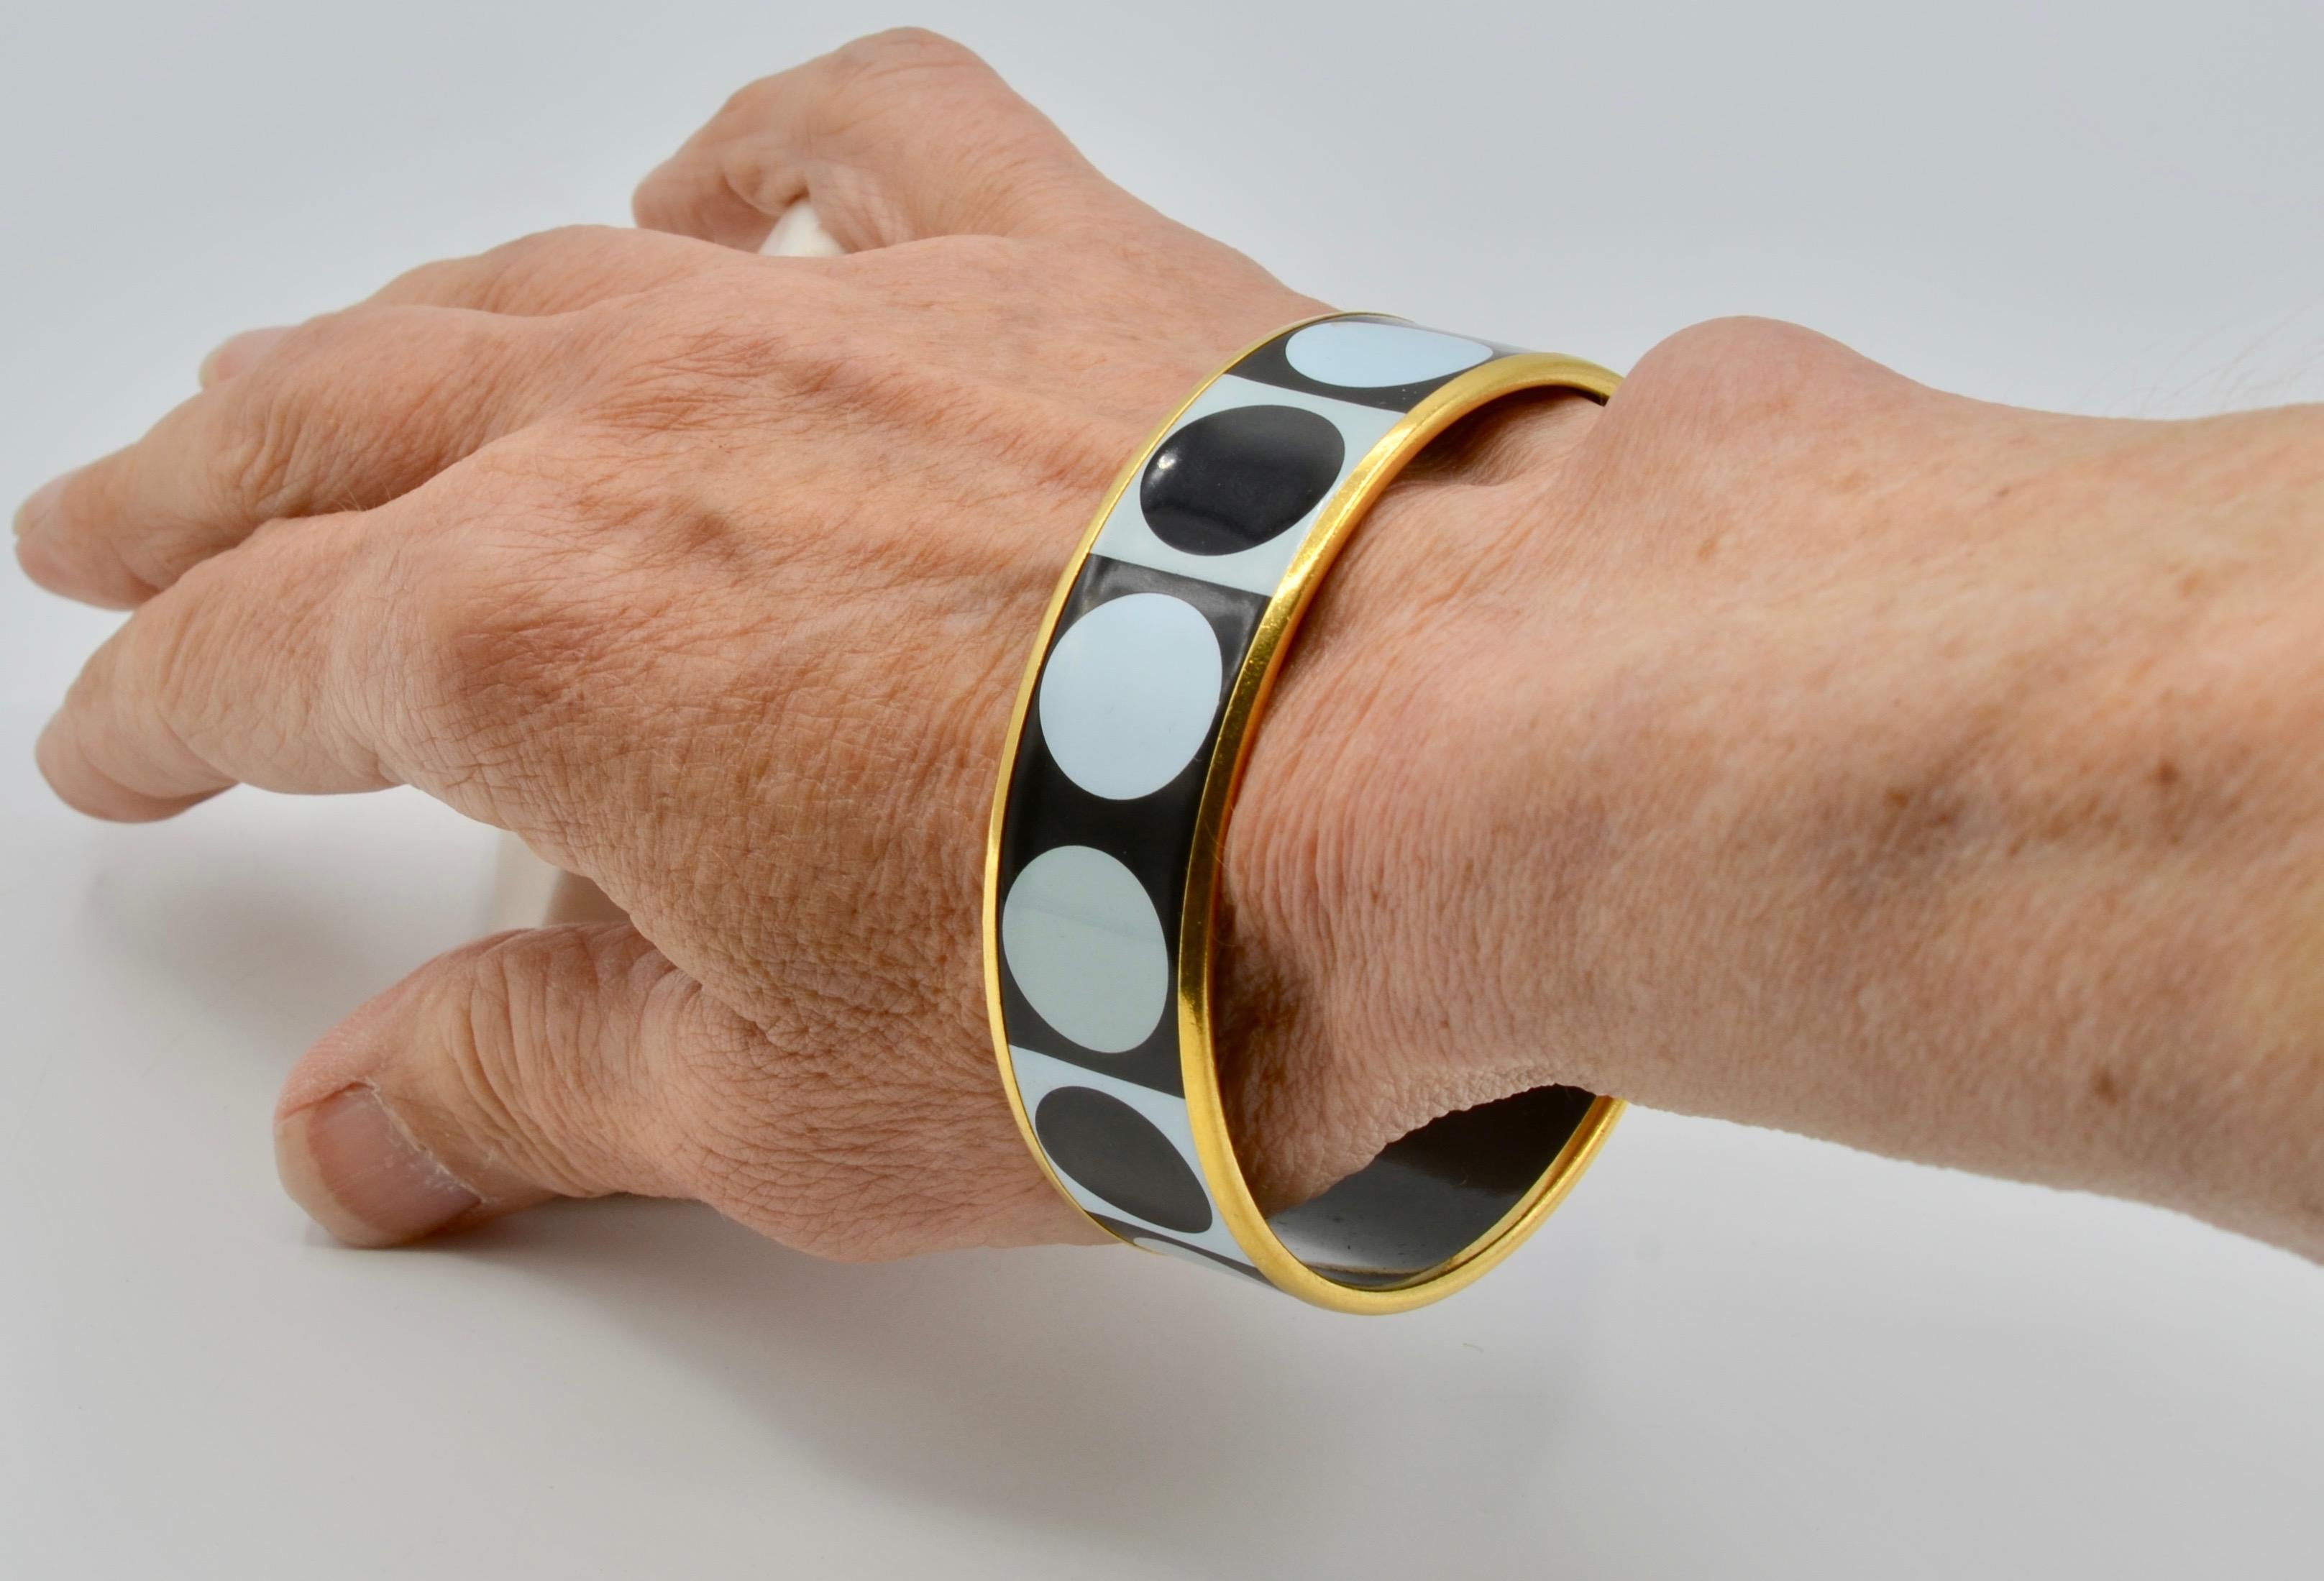 This iconic Hermes black and white Deco dot is a classic among the collection. The versatility and neutral color combination is the perfect addition to any collection. It can be paired with vibrant colors or stand alone in an all black or all white